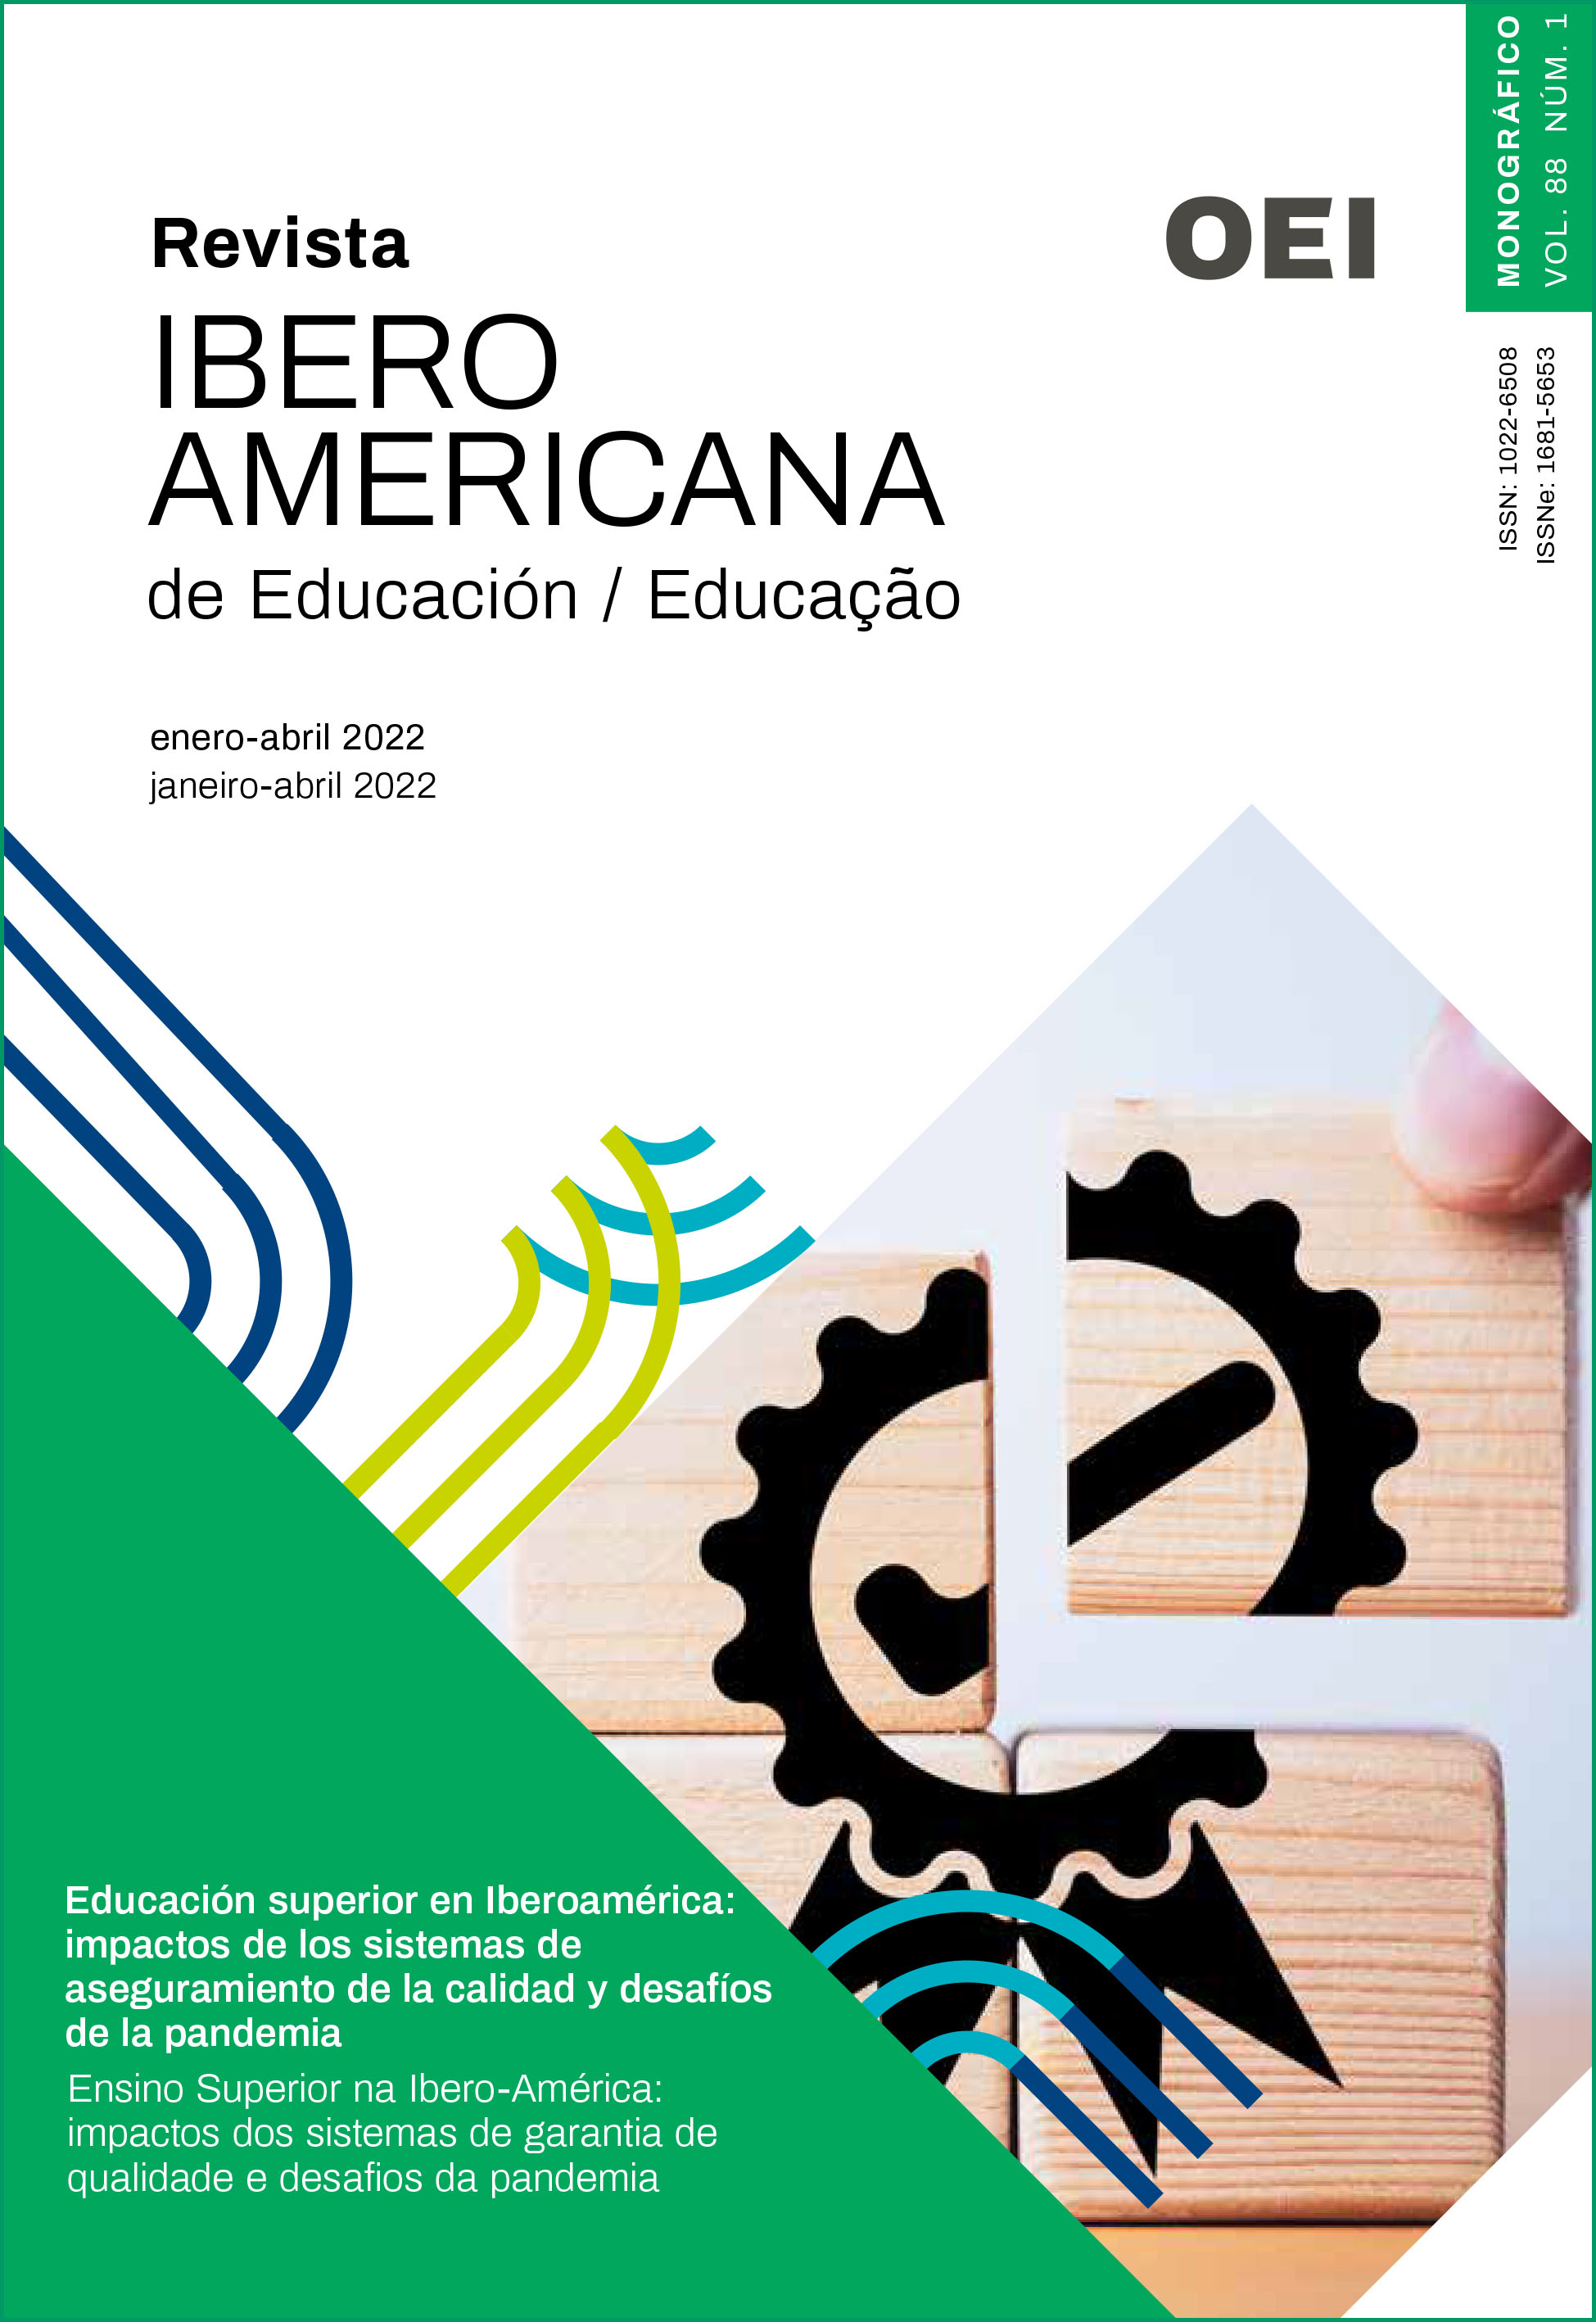 					View Vol. 88 No. 1 (2022): Higher education in Ibero-America: impacts of quality assurance systems and challenges of the pandemic
				